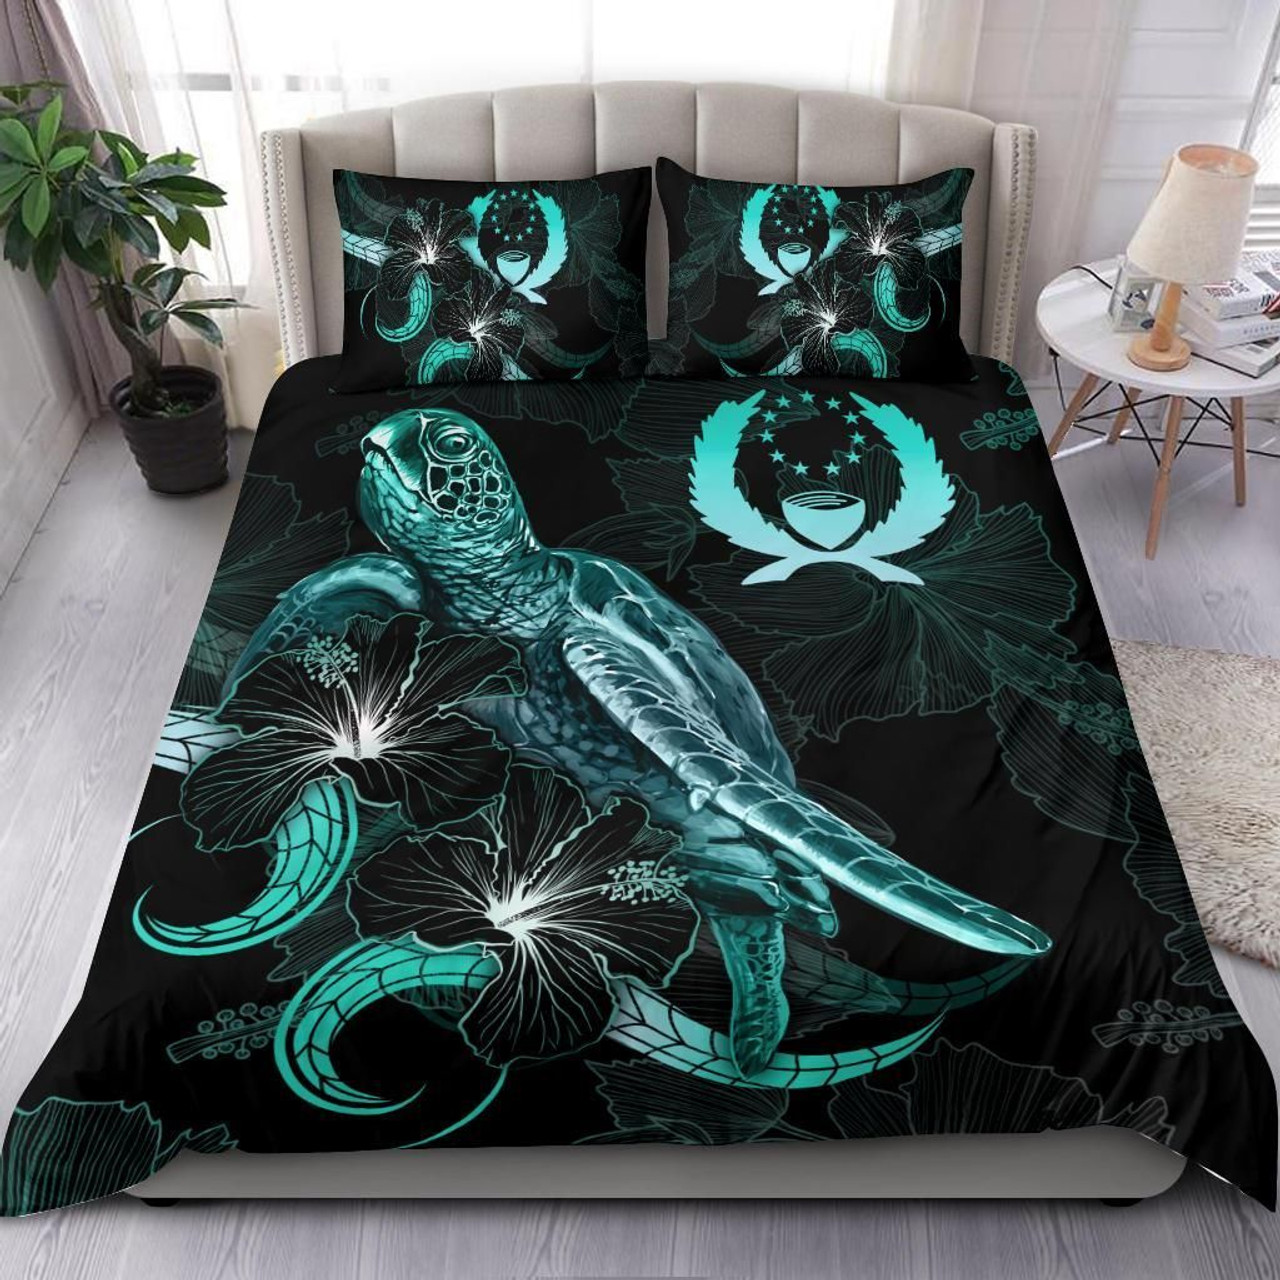 Pohnpei Polynesian Bedding Set - Turtle With Blooming Hibiscus Turquoise 1